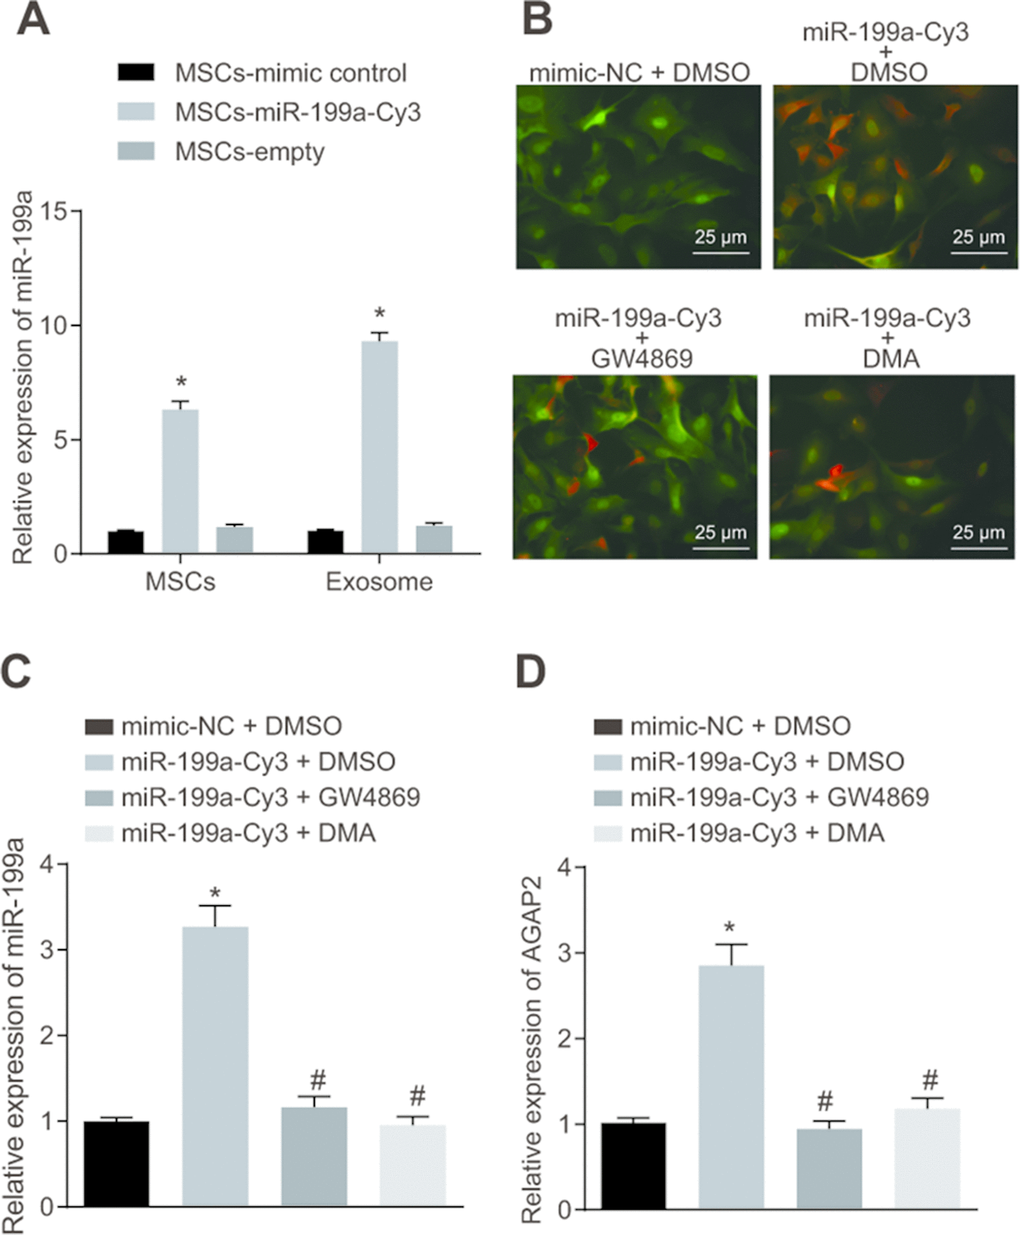 The hMSCs deliver miR-199a to glioma cells by secreting exosomes. (A) the expression of miR-199a in the presence of MSC-miR-199a, MSC-miR-control and MSC-empty, determined by RT-qPCR. (B) miR-199a could be delivered to U251 glioma cells form hMSCs, verified by fluorescence microscopy detection (scar bar = 25 μM). (C) the expression of miR-199a in U251 cells after co-culture, determined by RT-qPCR. (D) the expression of AGAP in U251 cells after co-culture, determined by RT-qPCR. * p p 